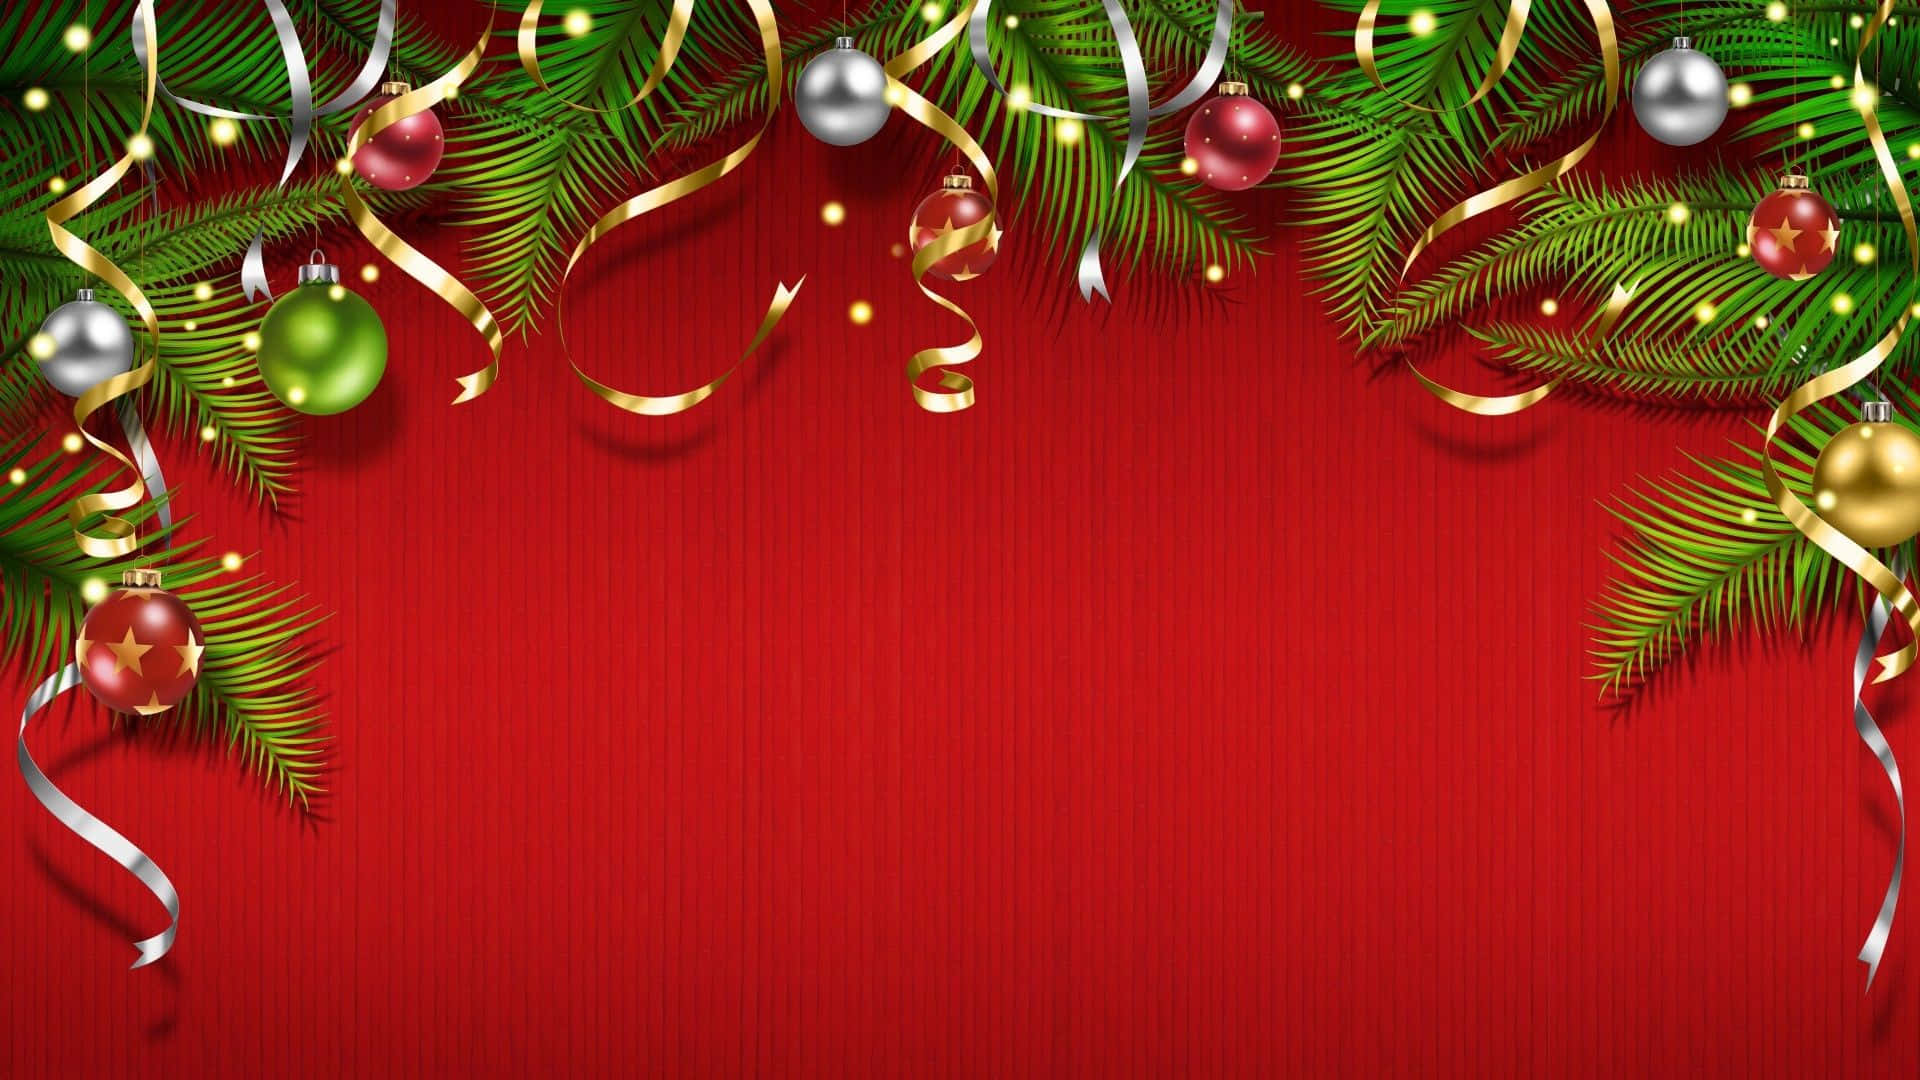 Celebrate Christmas in Style with a Red Background